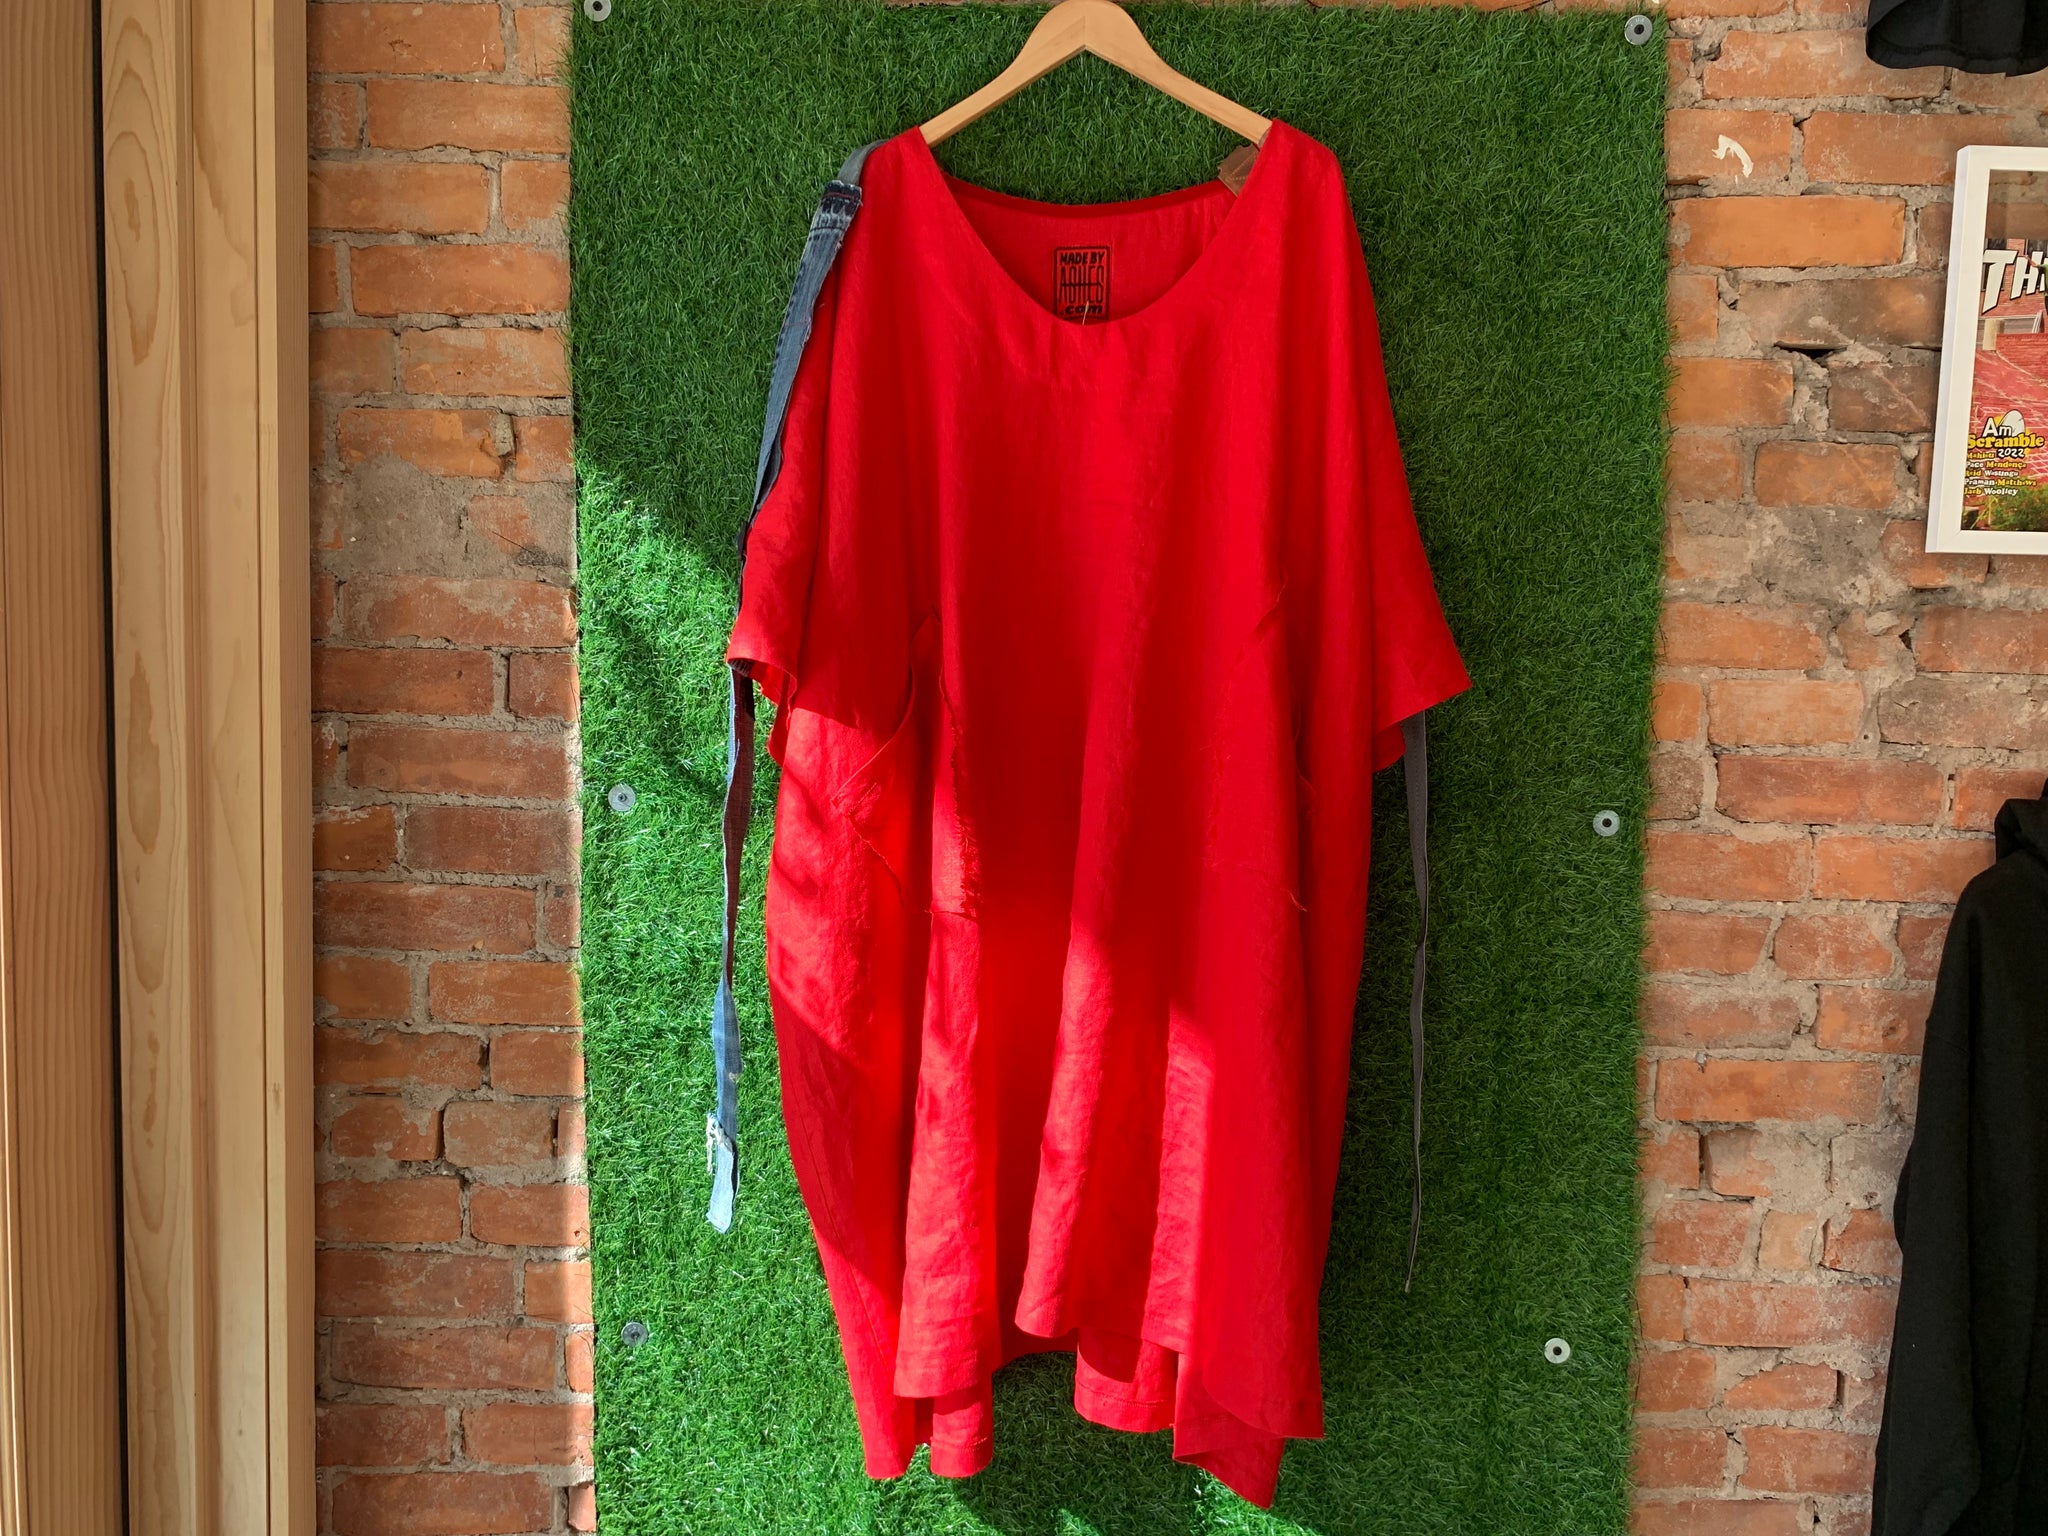 33 RED LINEN SHIRT- FITS UP TO 3XL - ONE OF A KIND